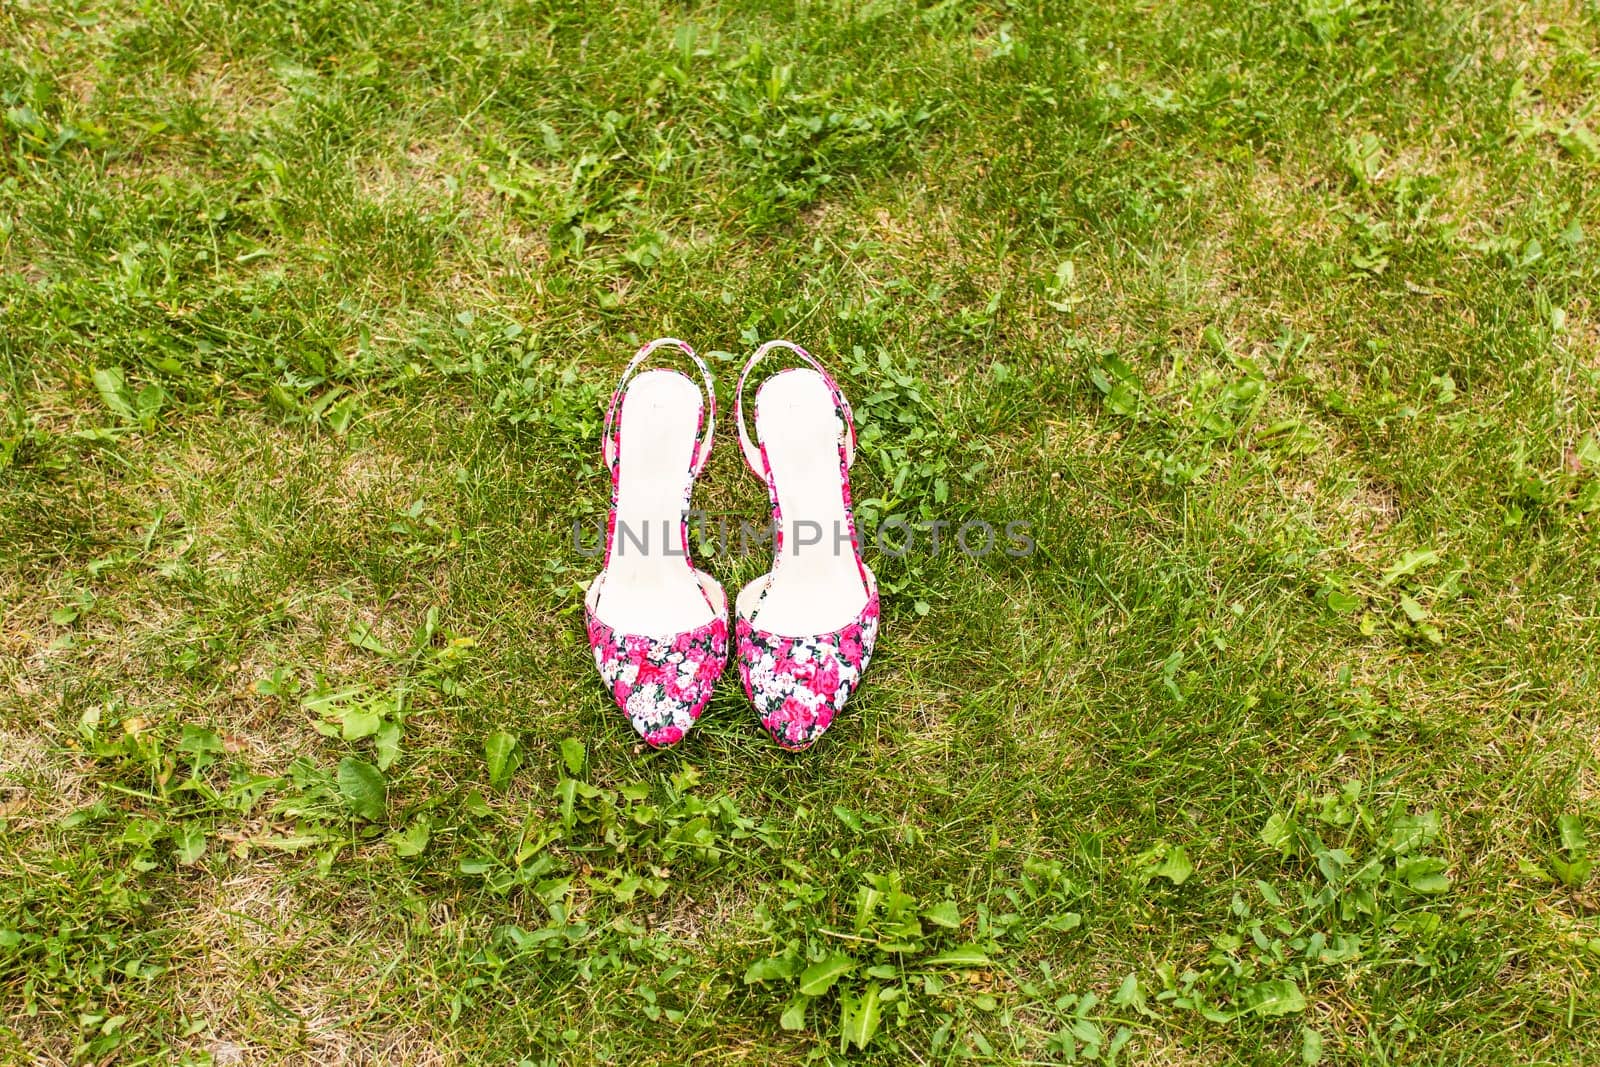 Shoes of a woman on green grass. Summer holiday concept, daylight.